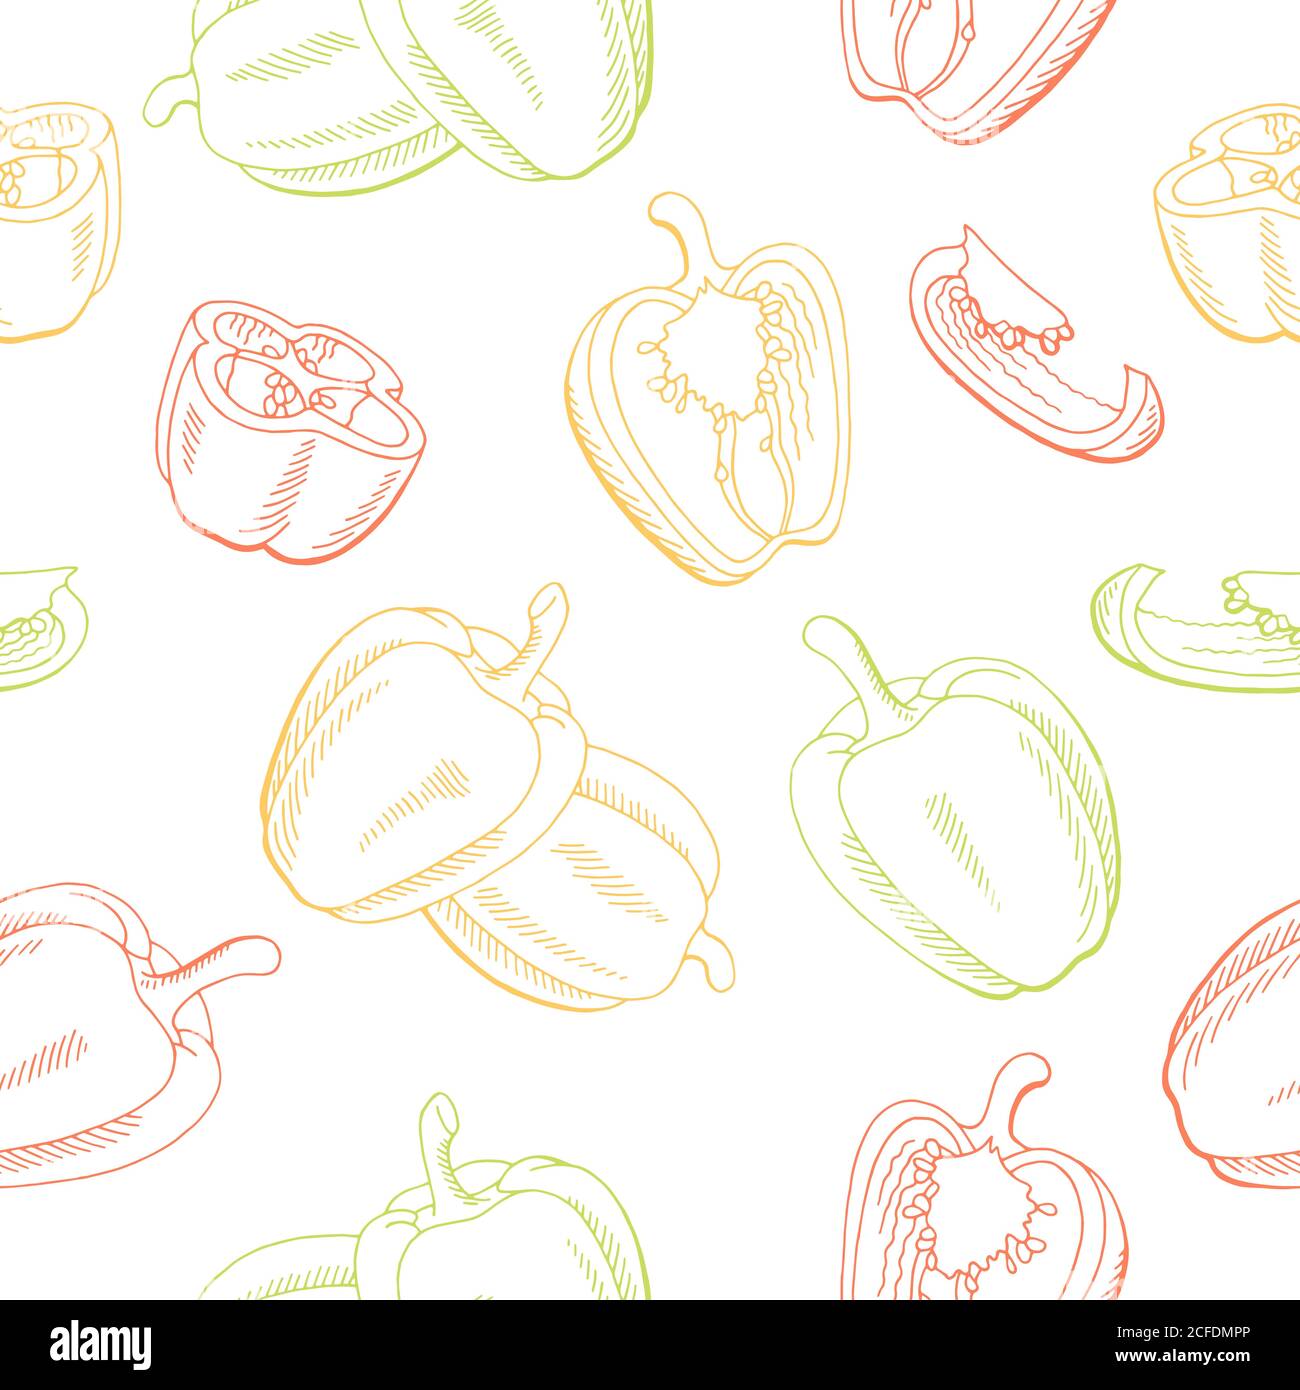 Pepper graphic color seamless pattern sketch illustration vector Stock Vector